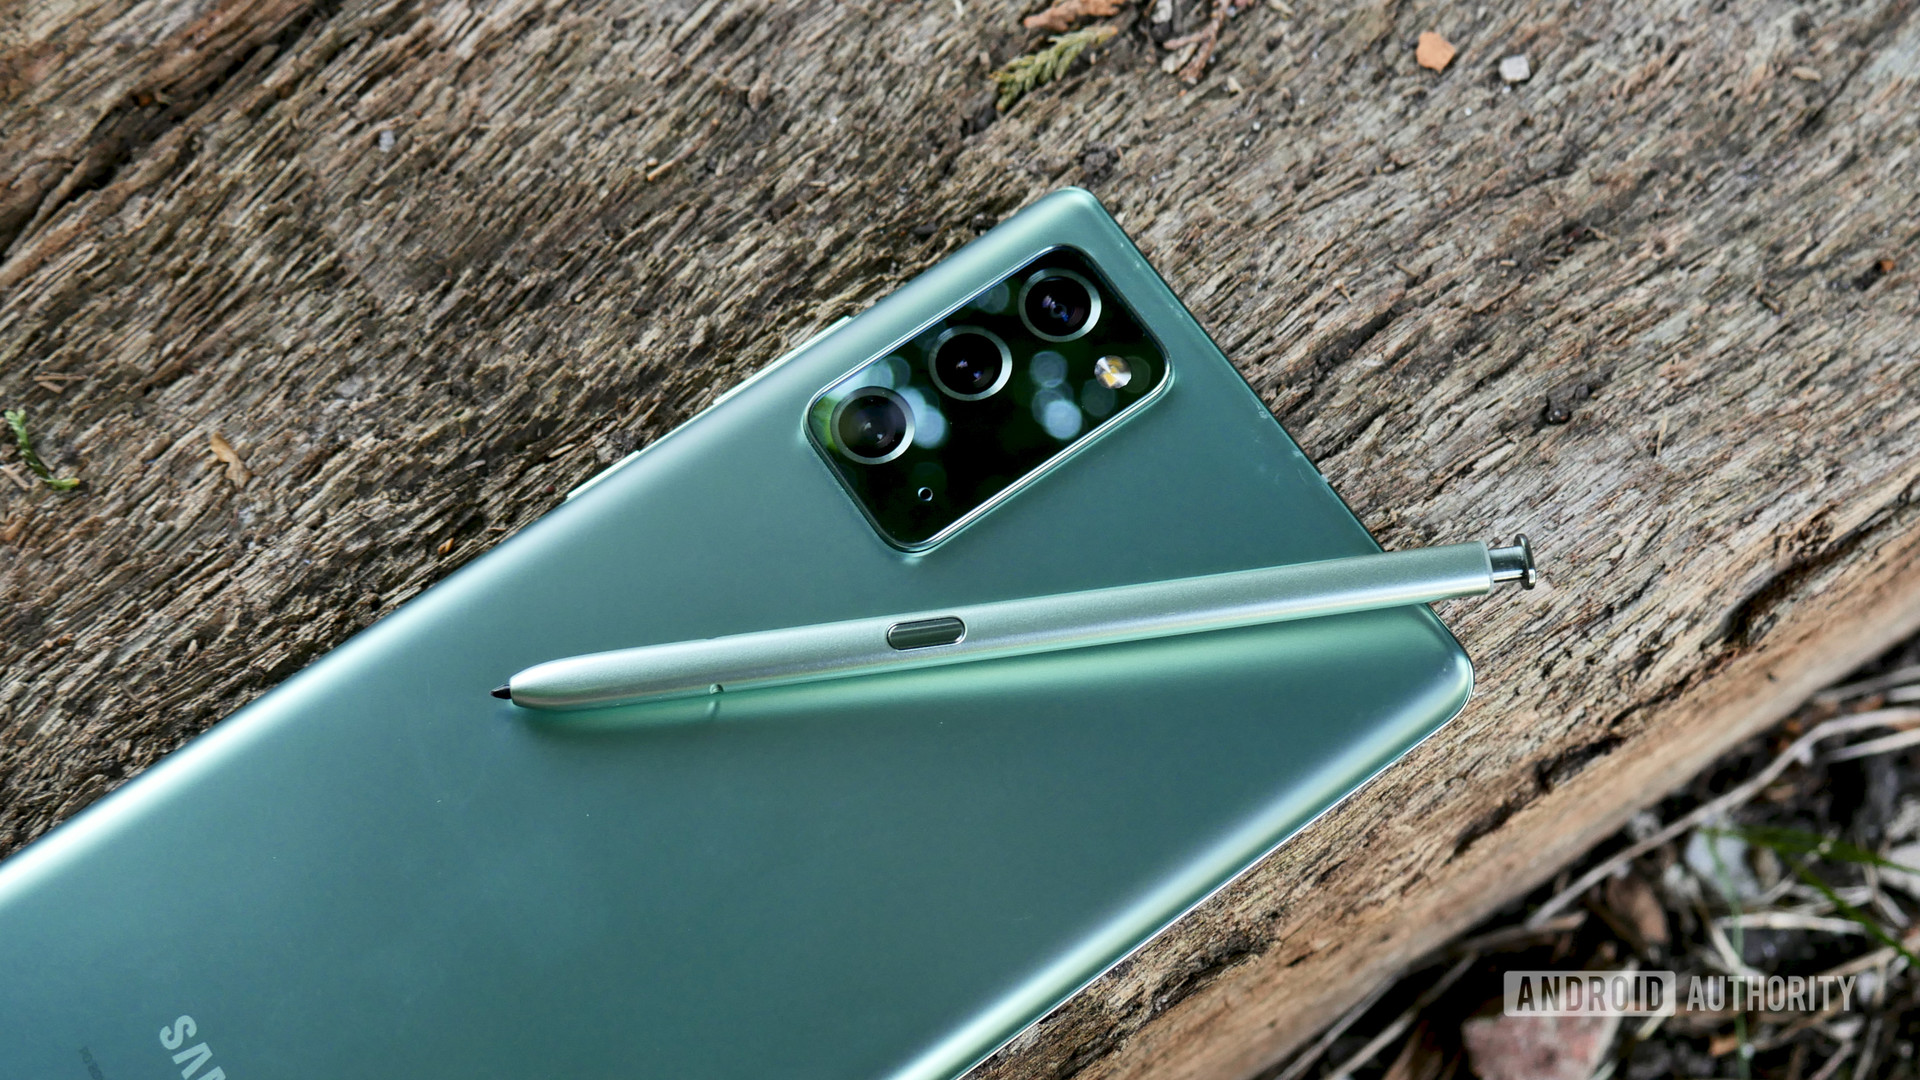 Samsung Galaxy Note 10 Pro looks jaw-droppingly beautiful in these